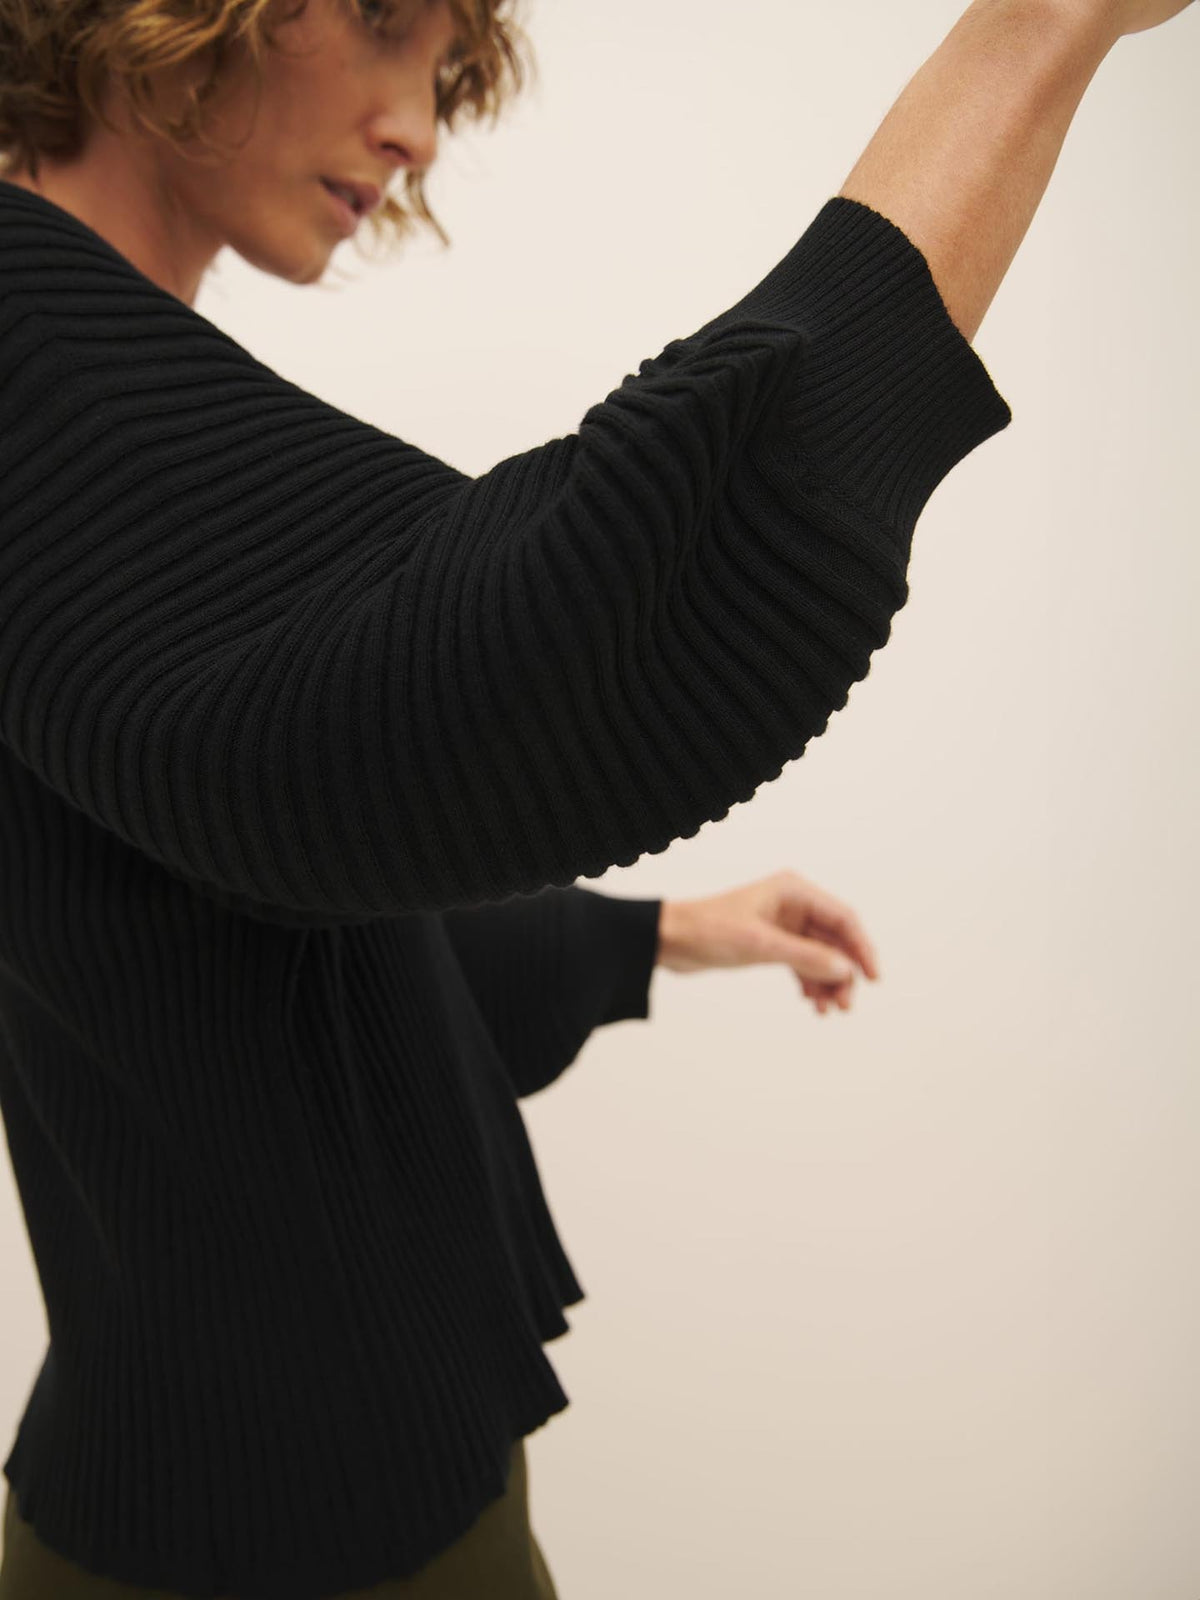 A person in a Kowtow Cassia Sweater – Black extending their arm to the side.